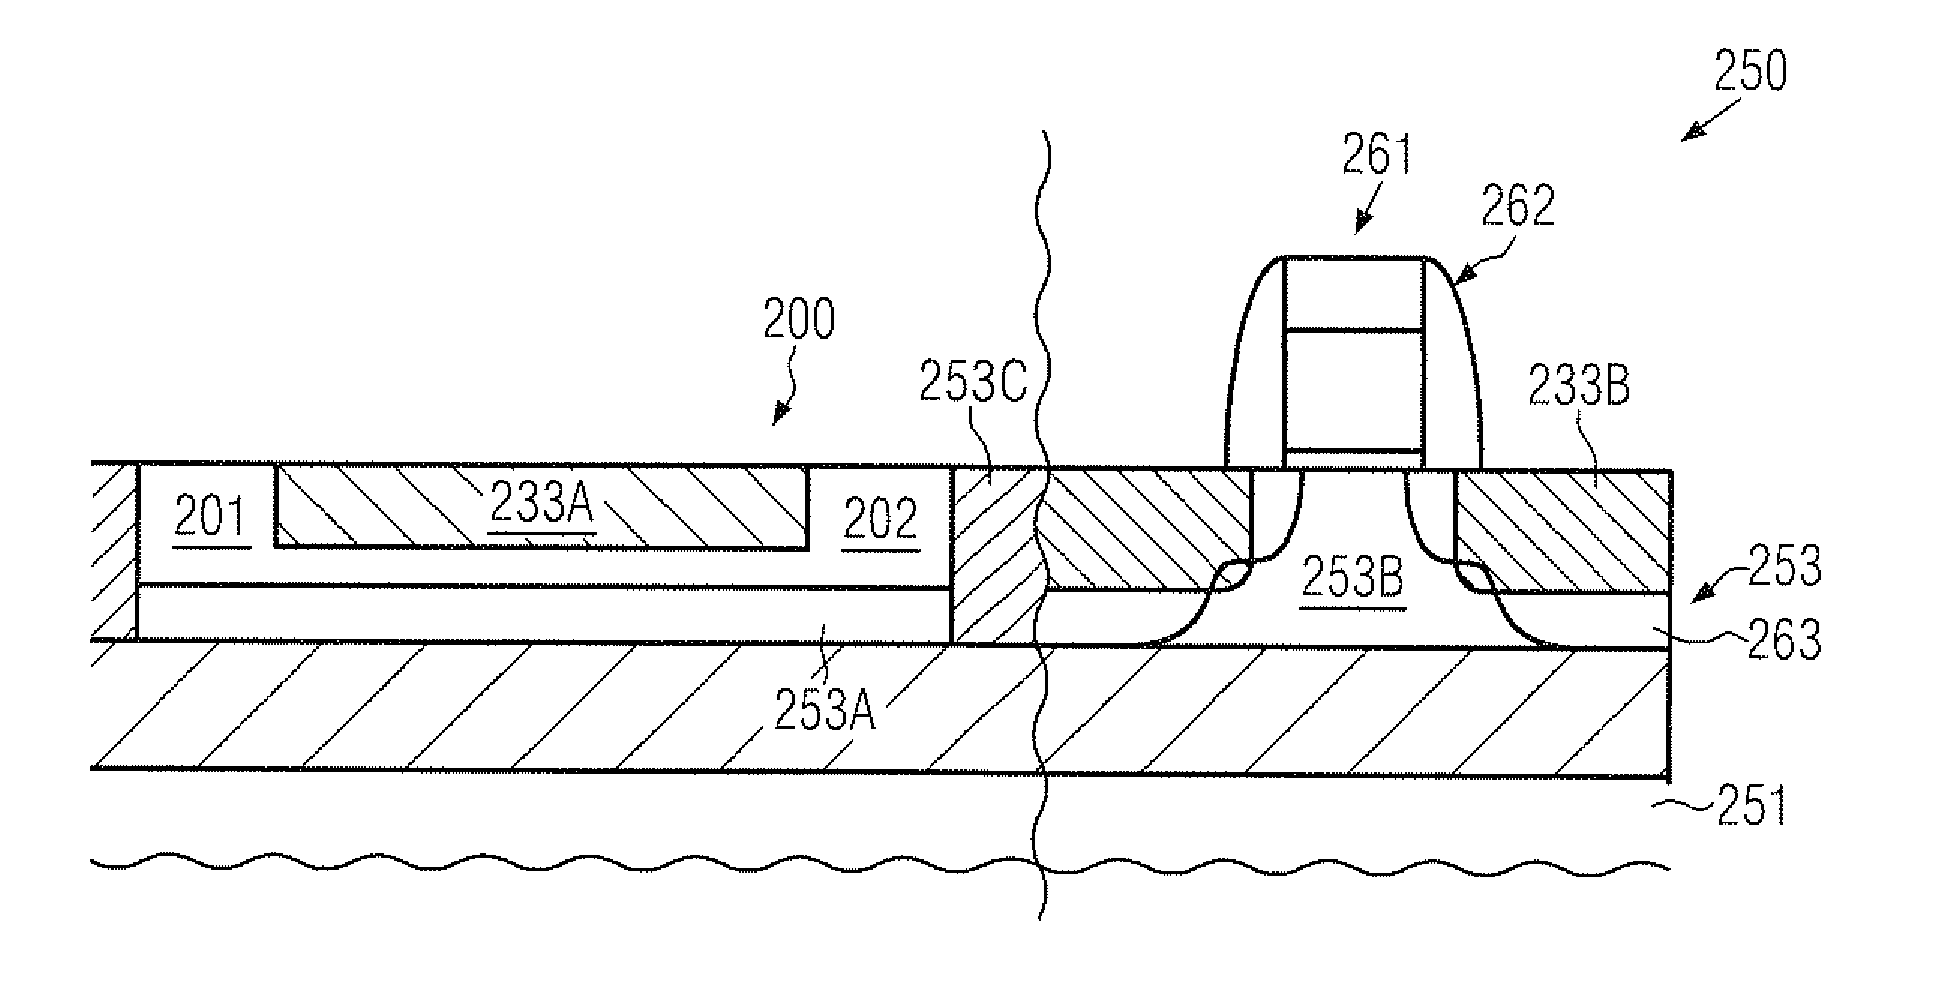 SILICON-BASED SEMICONDUCTOR DEVICE COMPRISING eFUSES FORMED BY AN EMBEDDED SEMICONDUCTOR ALLOY